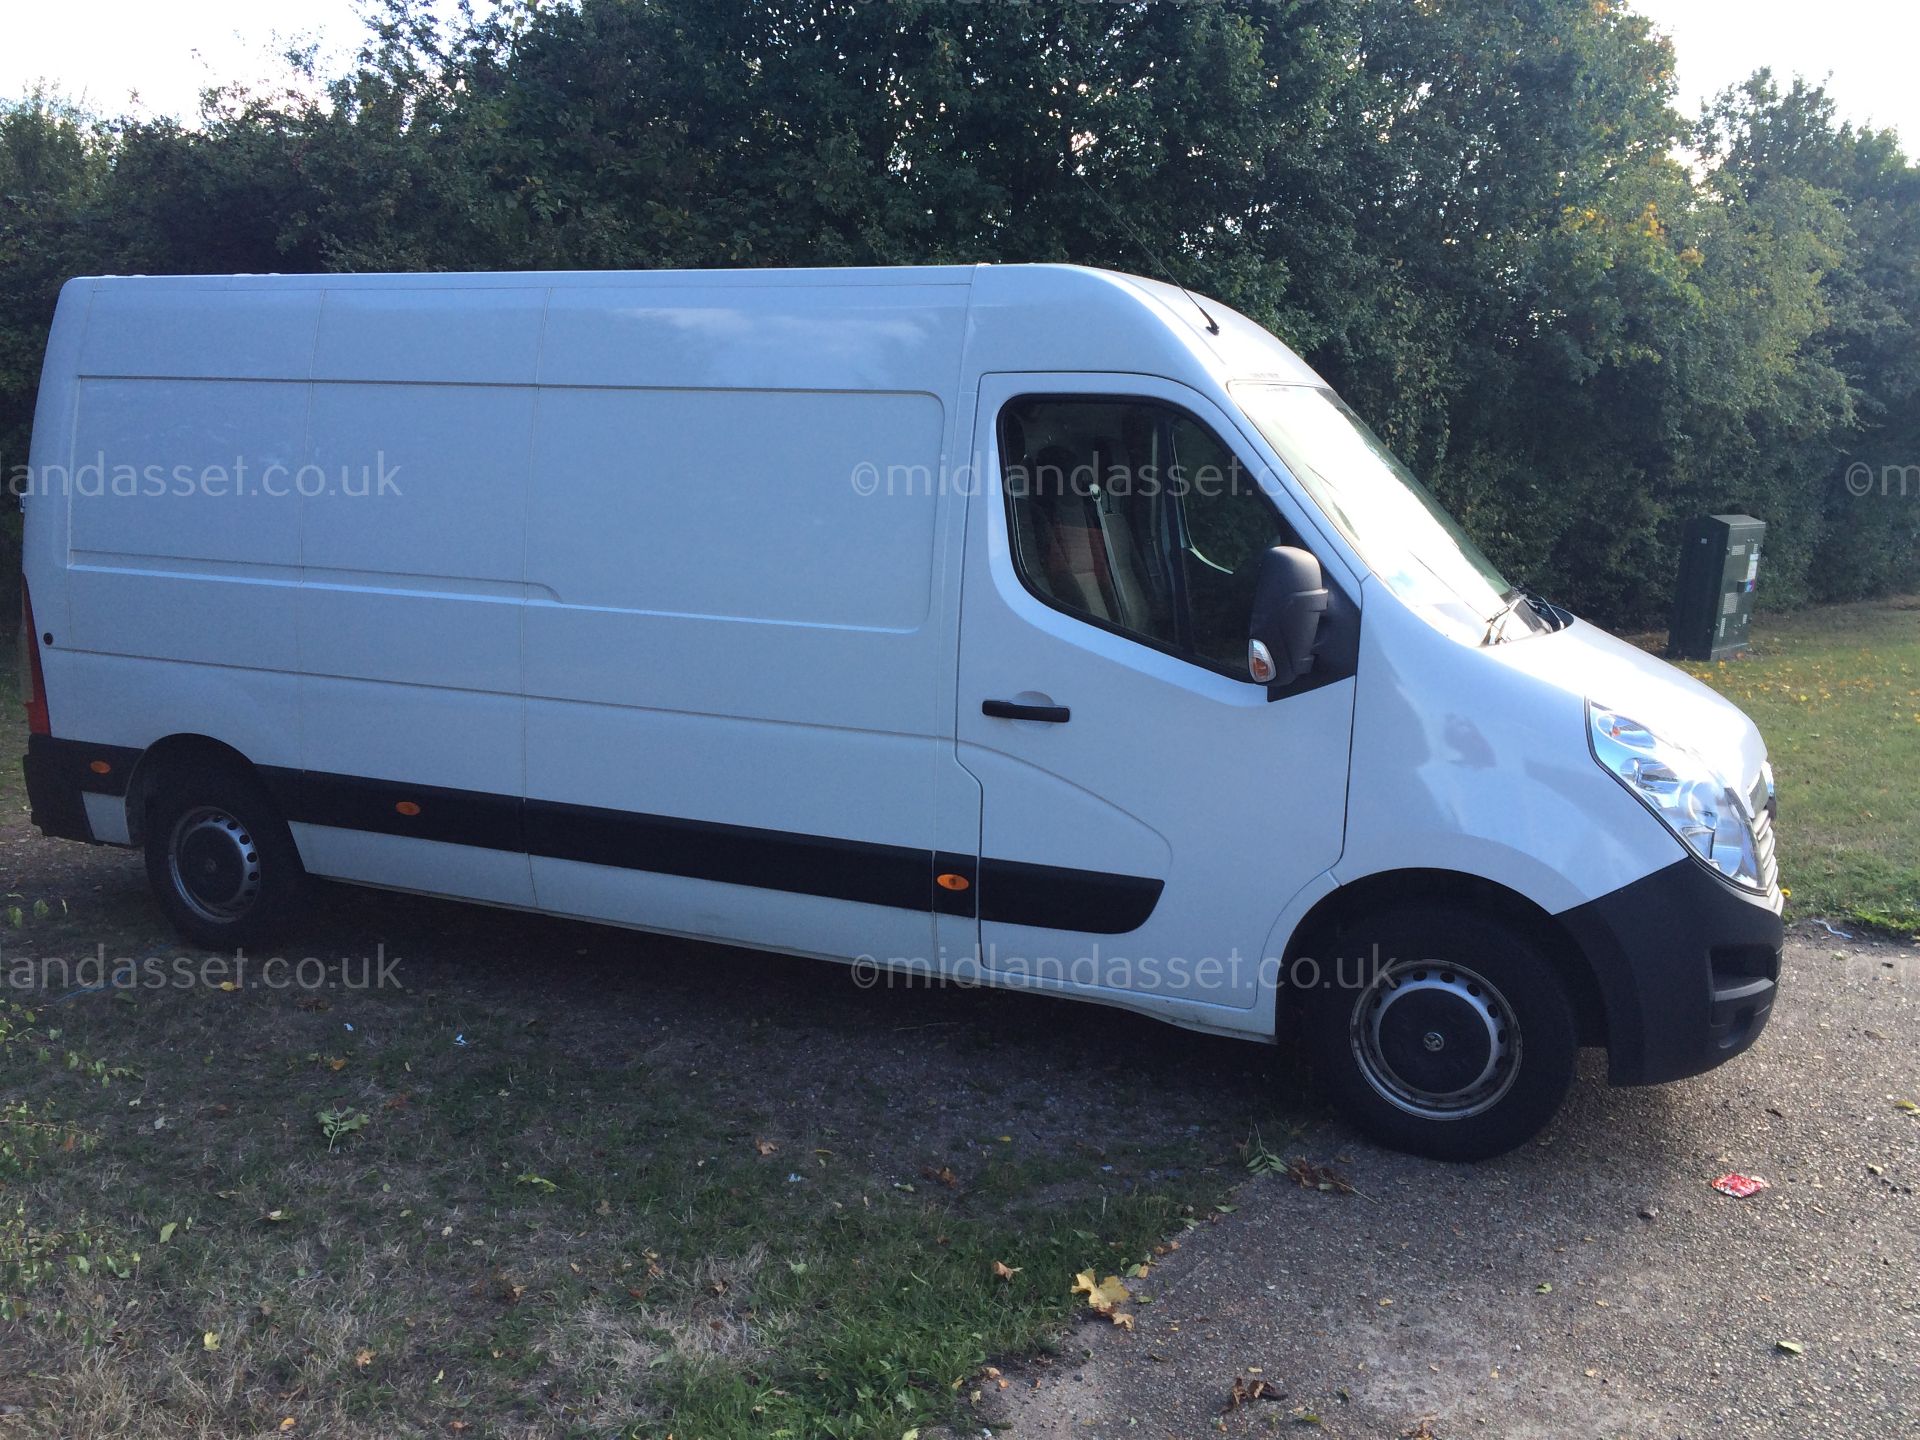 P - 2014/14 REG VAUXHALL MOVANO F3500 L3H2 CDTI 125 PANEL VAN ONE OWNER   DATE OF REGISTRATION: 17th - Image 2 of 5